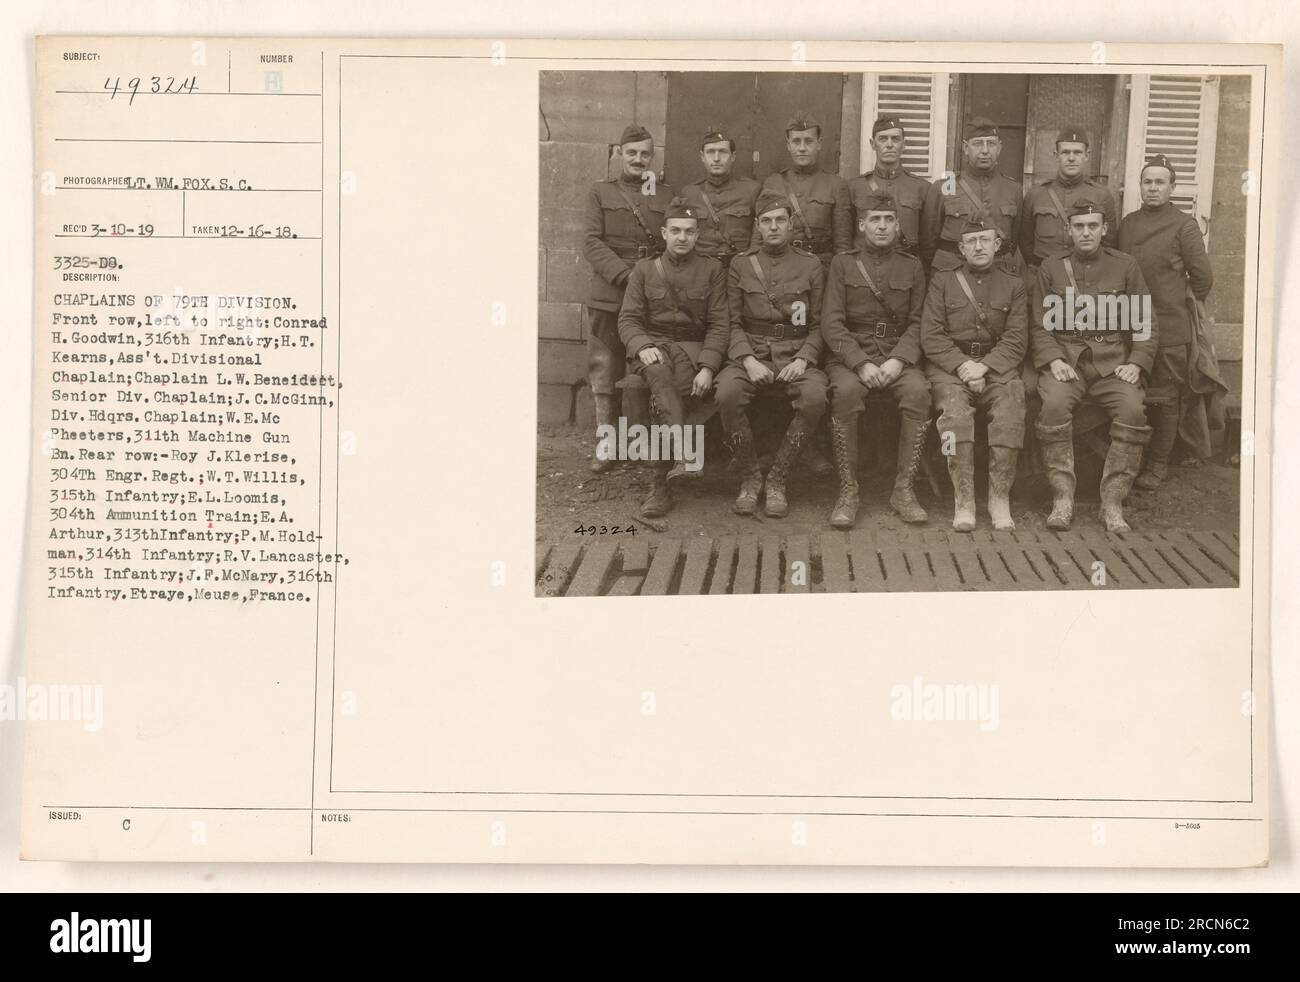 'Chaplains of the 79th Division pose for a formal group photograph. Front row, from left to right: Conrad H. Goodwin, H. T. Kearns, L. W. Beneideet, J. C. McGinn, W. E. MePheeters. Rear row: Roy J. Klerise, W. T. Willis, E. L. Loomis, E. A. Arthur, P. M. Holdman, R. V. Lancaster, J.F. McNary. Taken in Etraye, Meuse, France.' Stock Photo